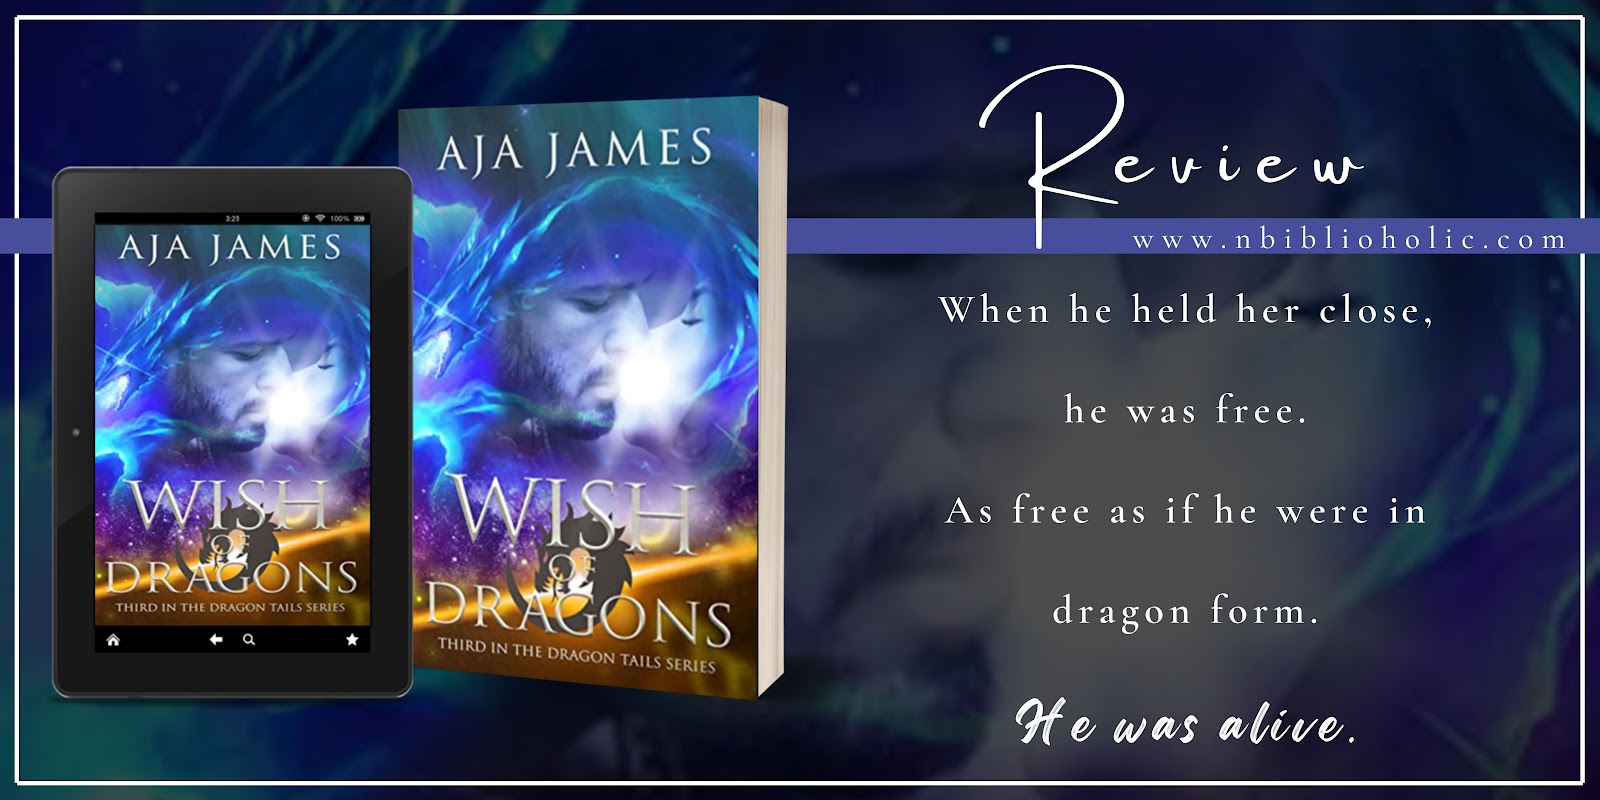 Wish of Dragons by Aja James